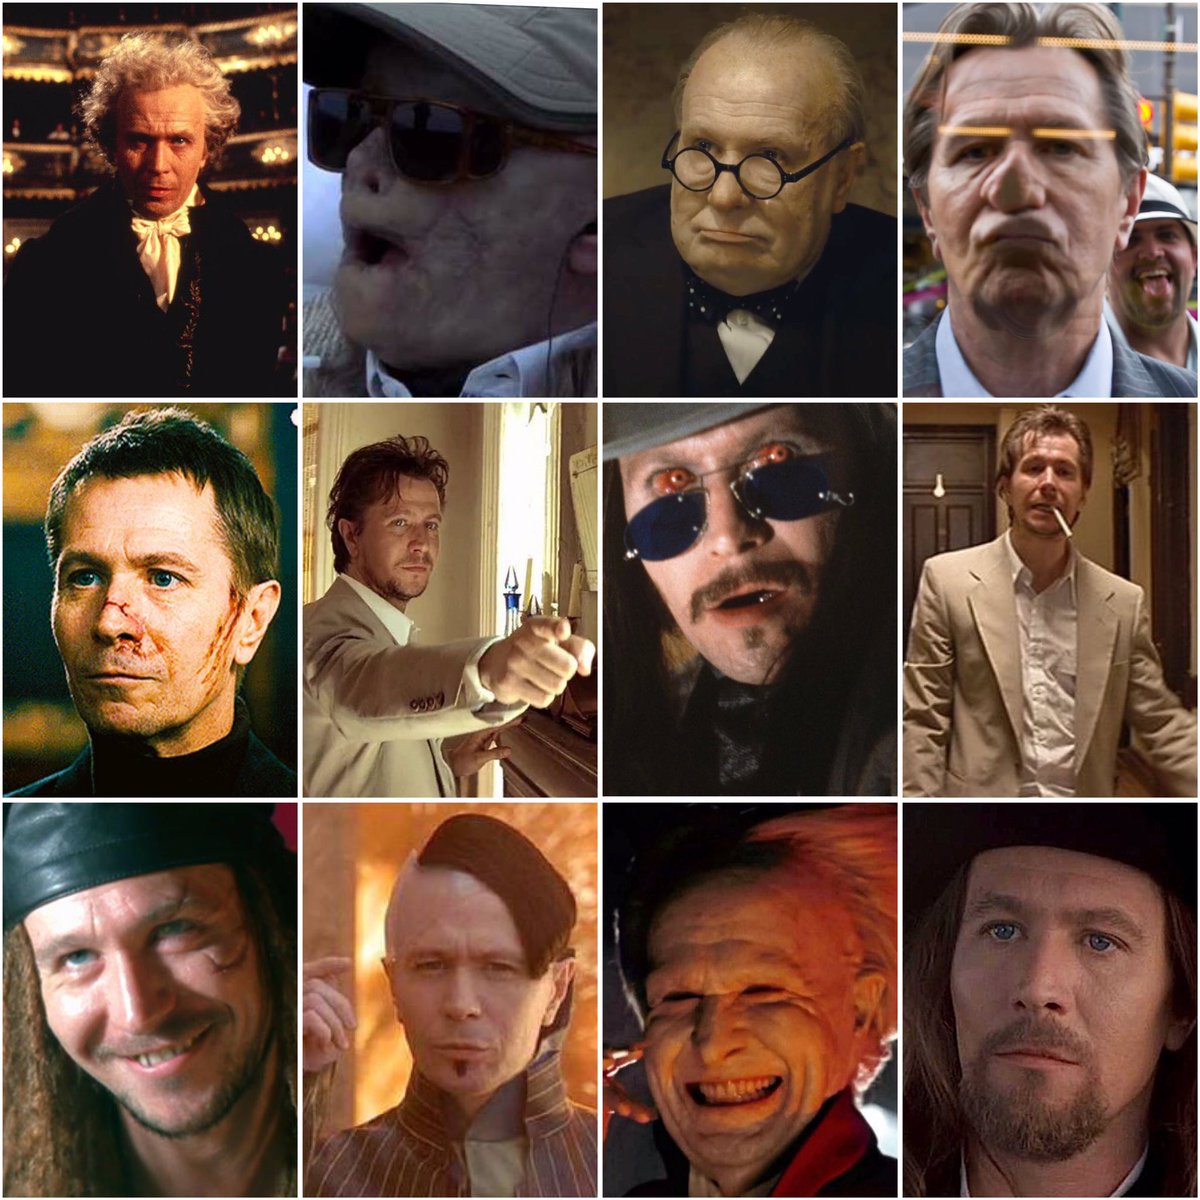 On a scale of Gary Oldman where are you currently at? 🖤